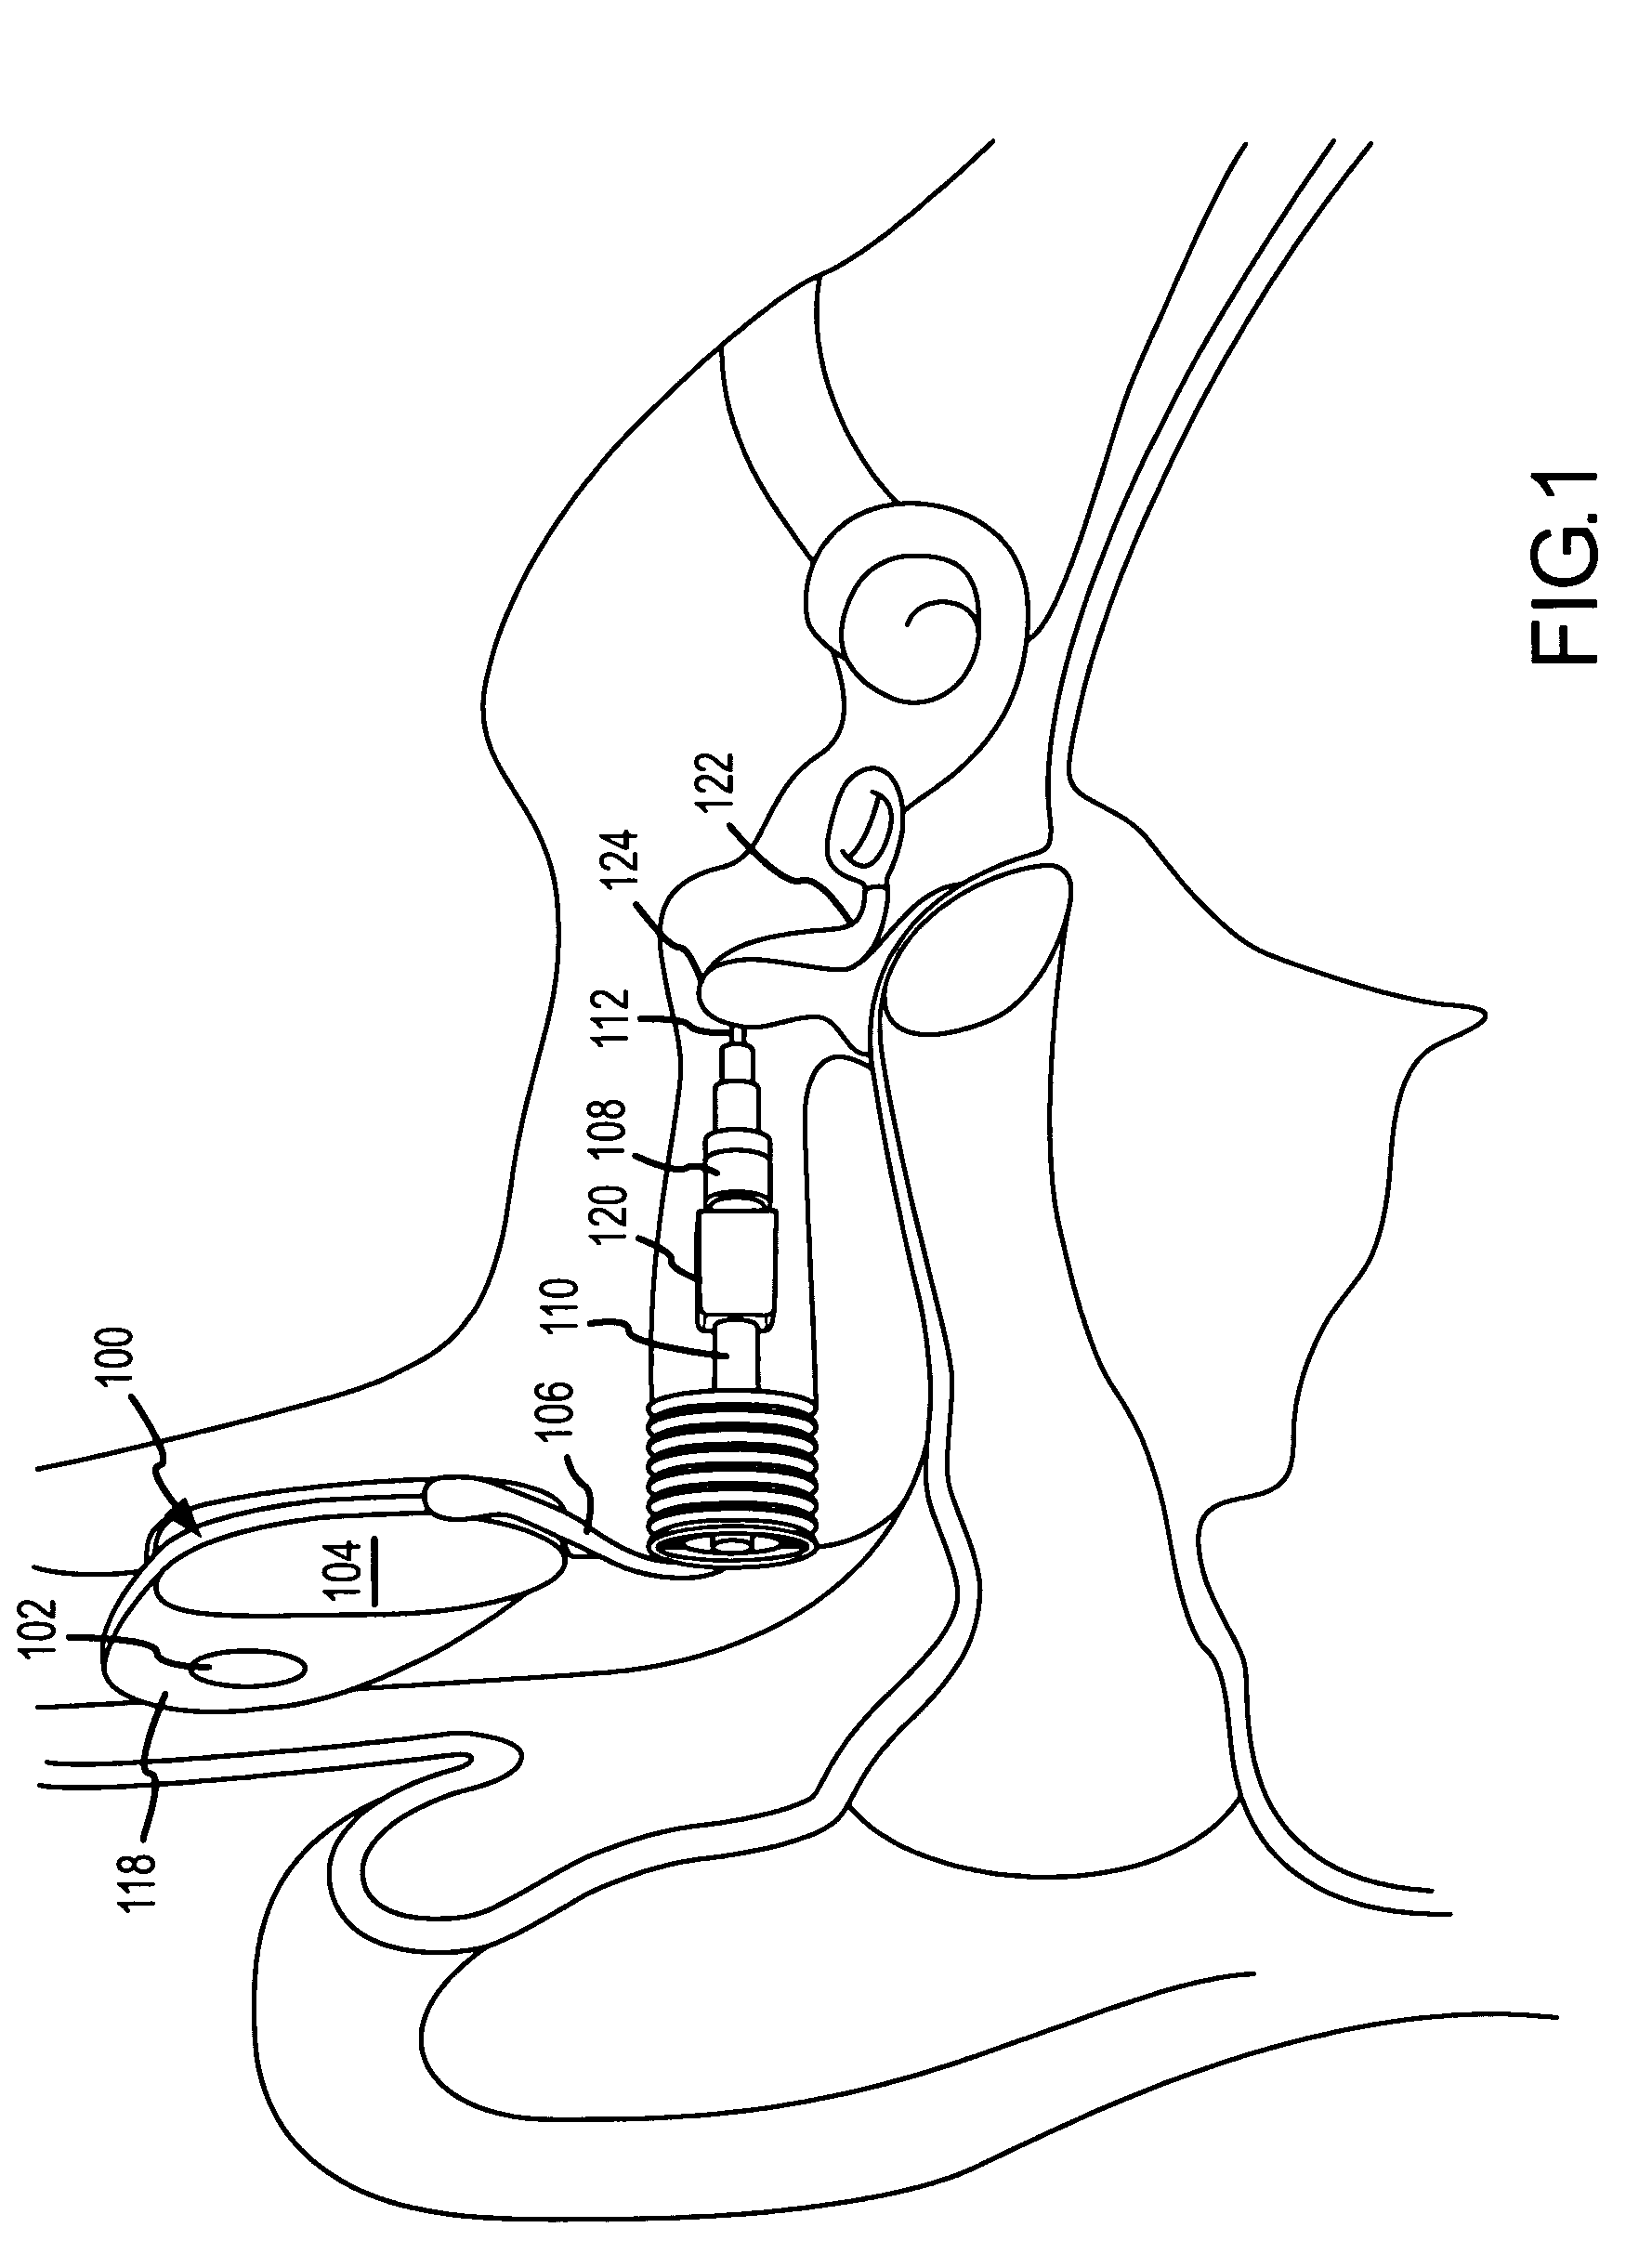 Implantable hearing aid transducer interface